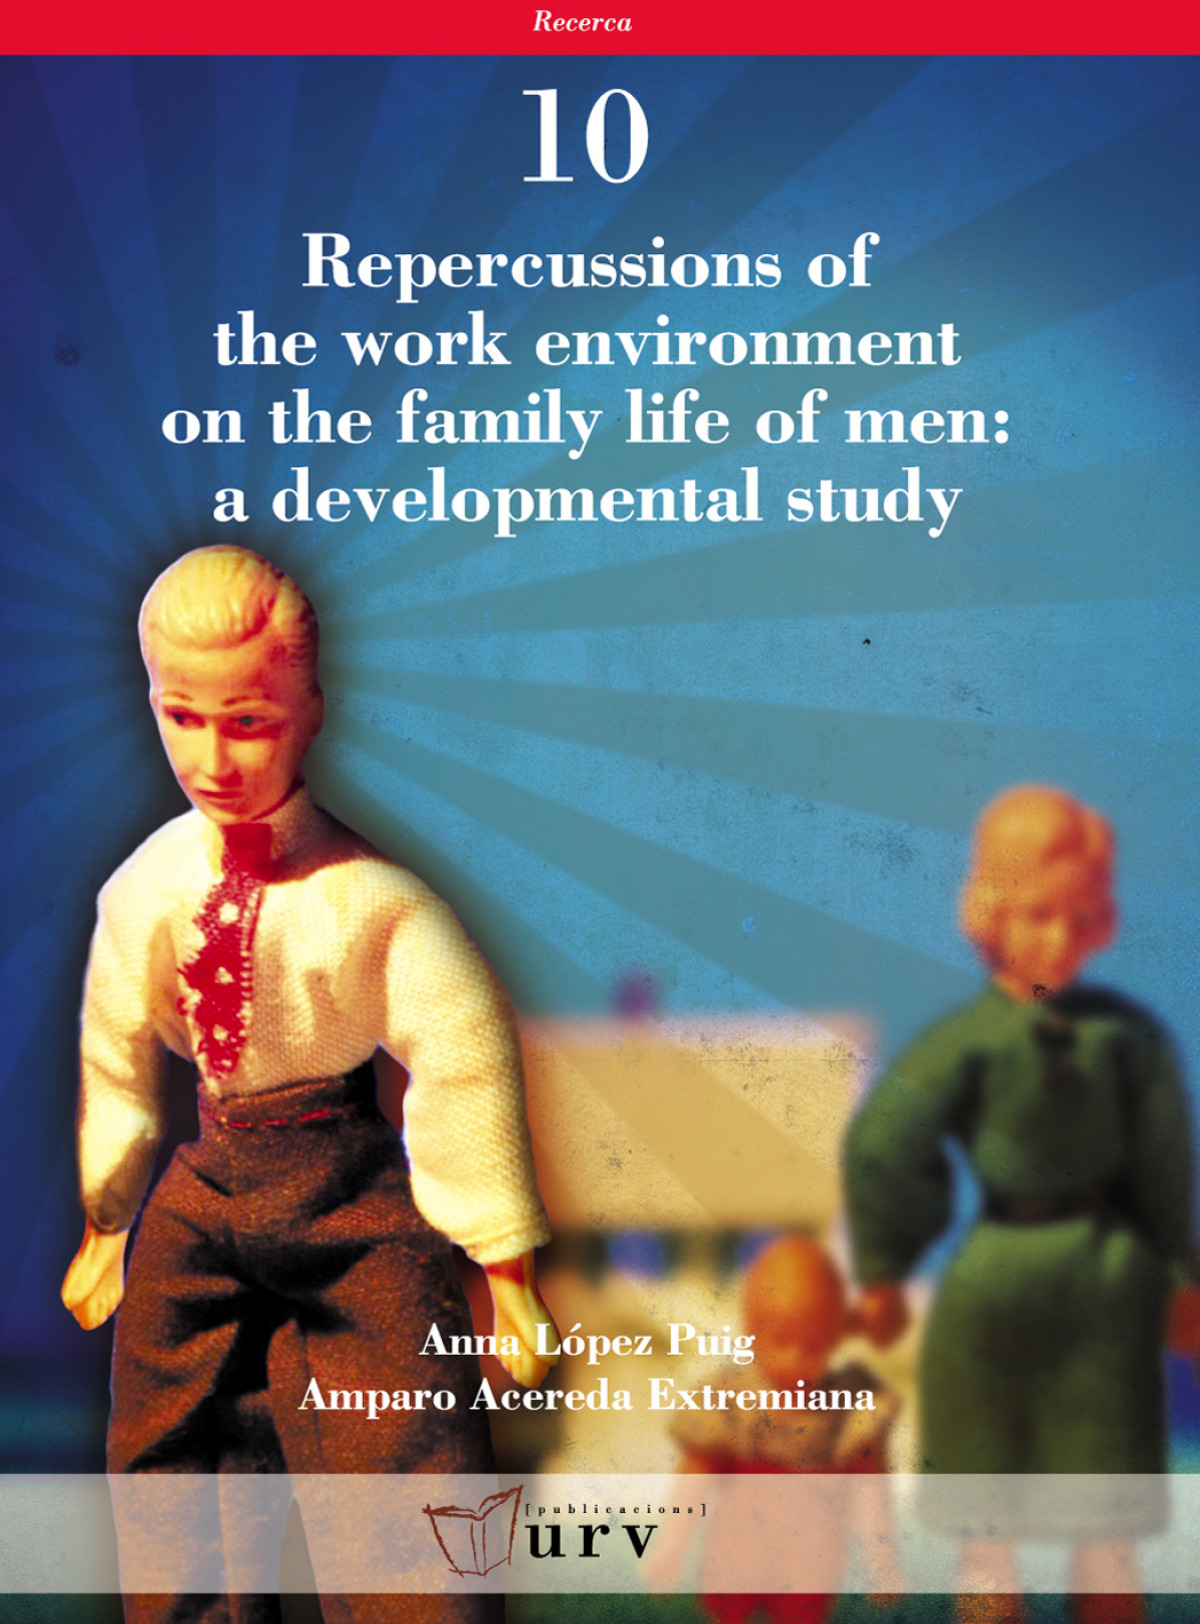 Repercussions of the work environment on the family life of men: a developmental - López Puig, Anna / Acereda Extremiana, Amparo